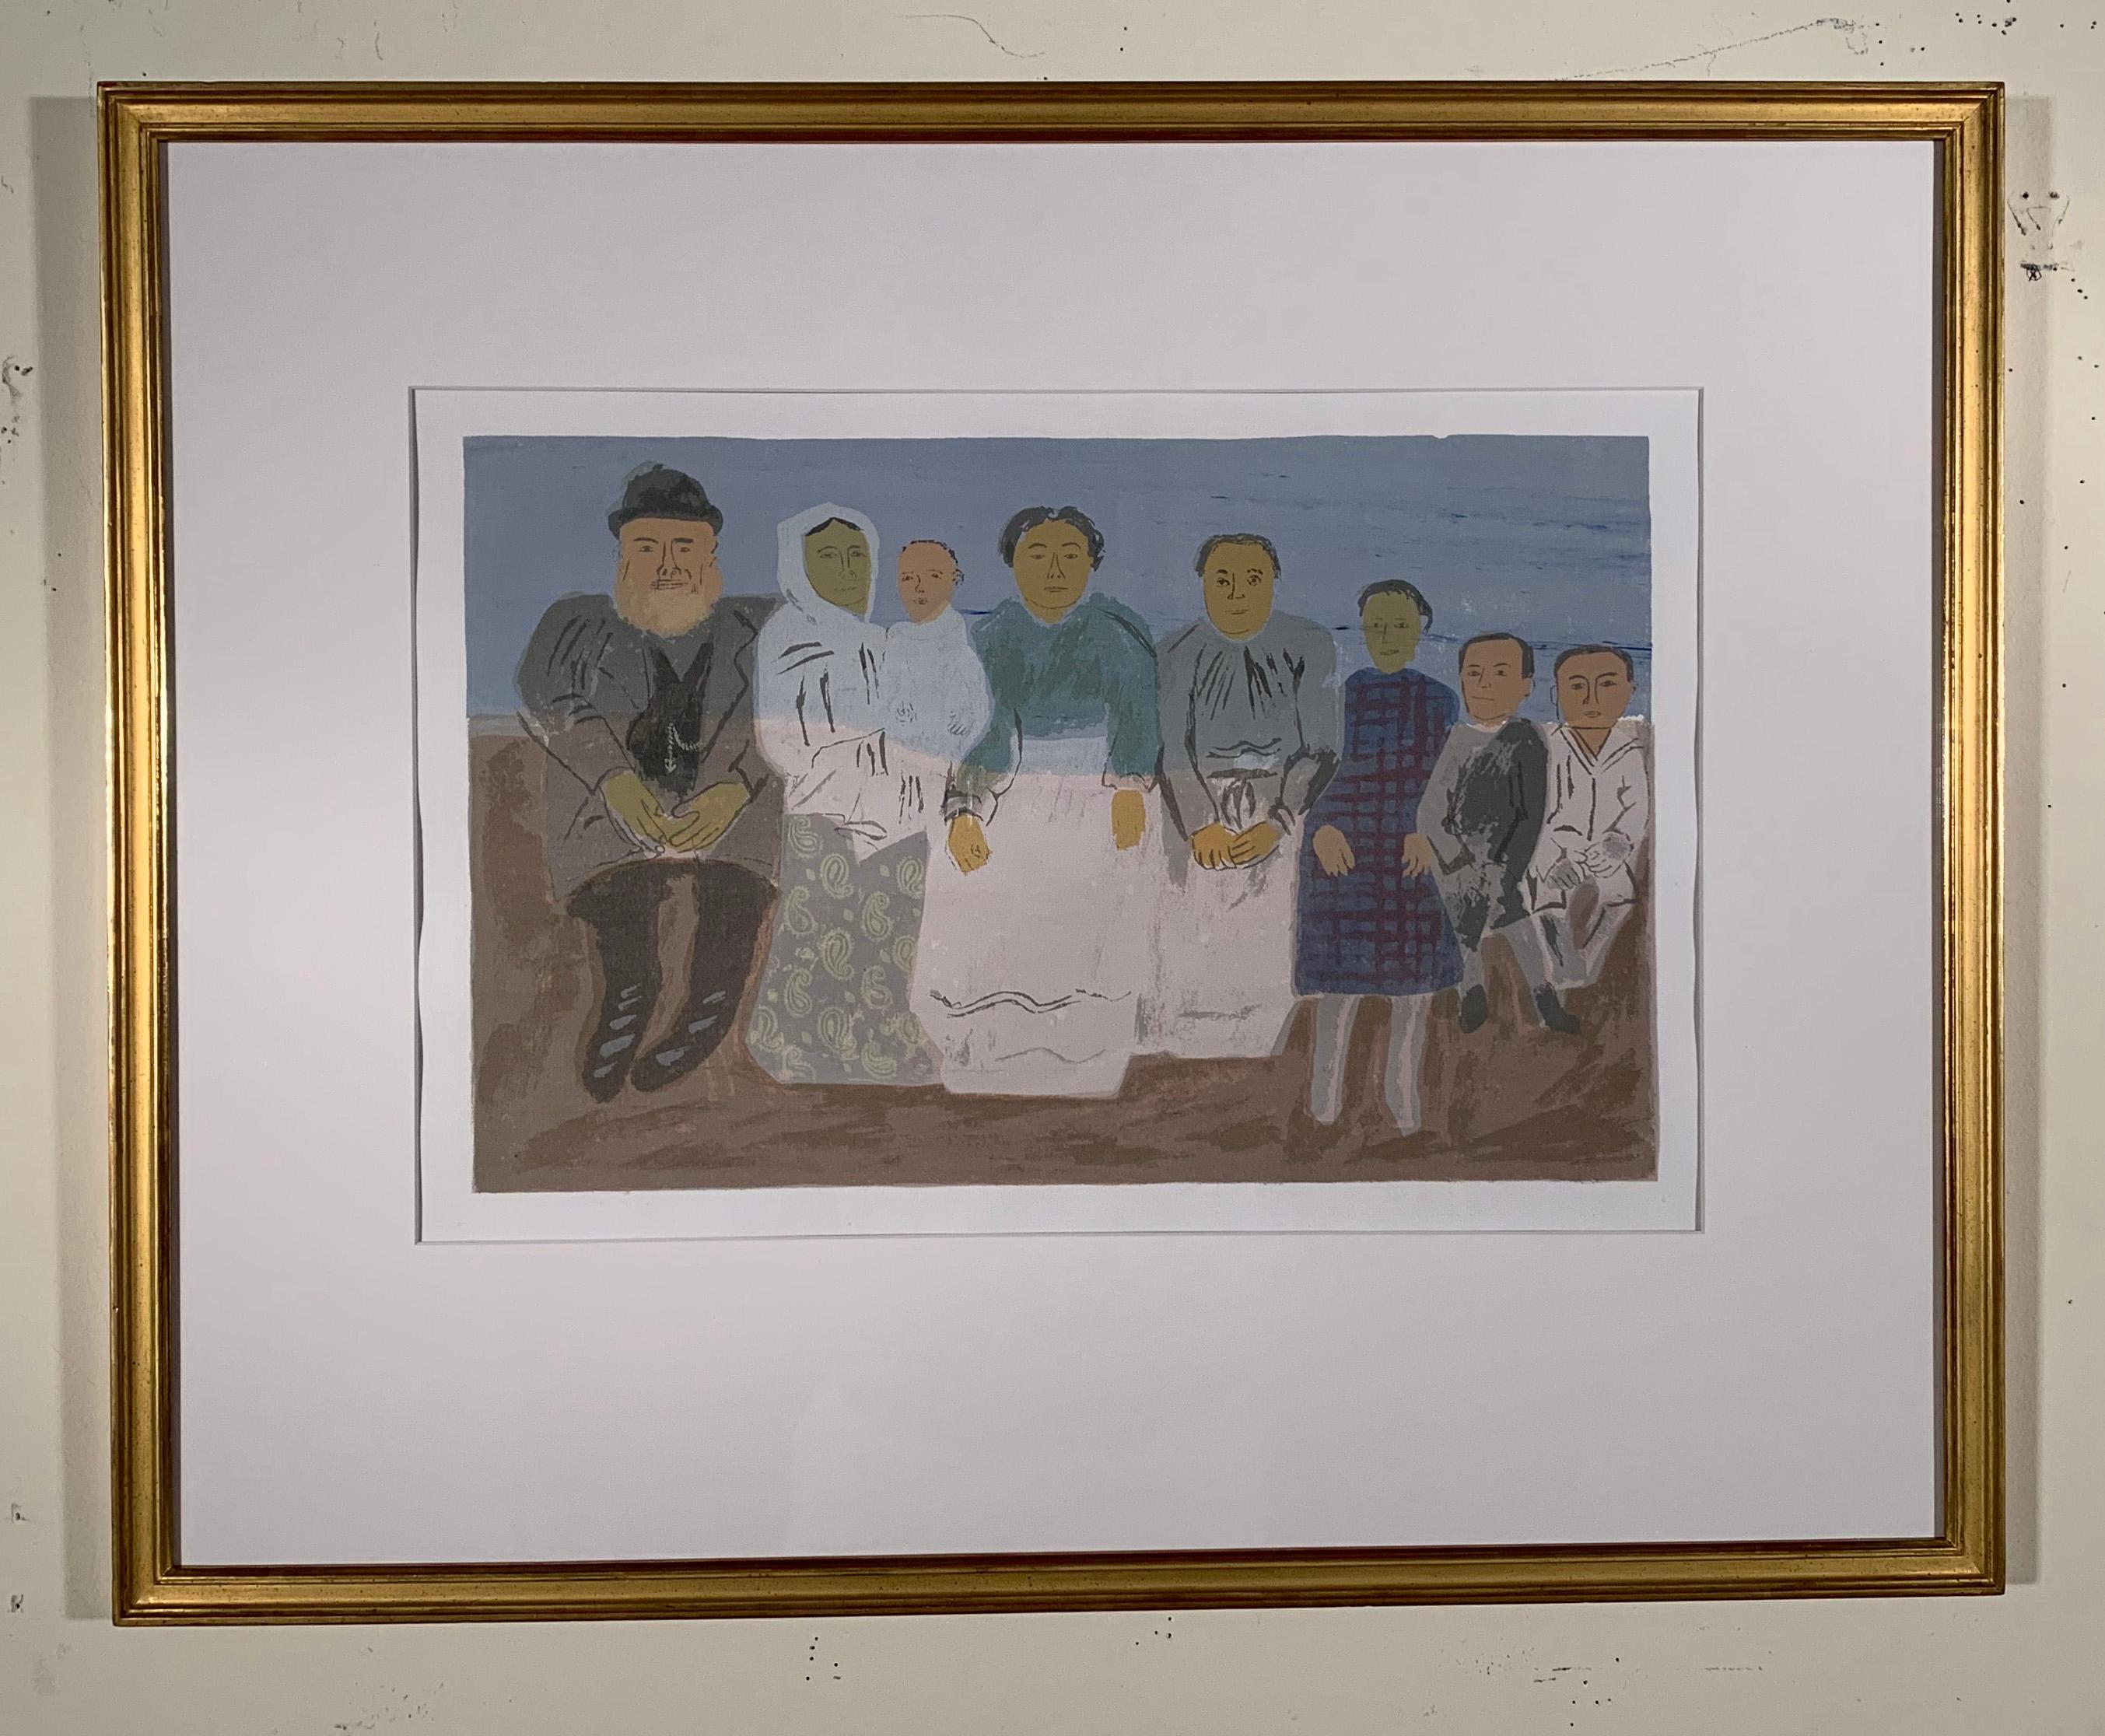 IMMIGRANT FAMILY - Print by Ben Shahn